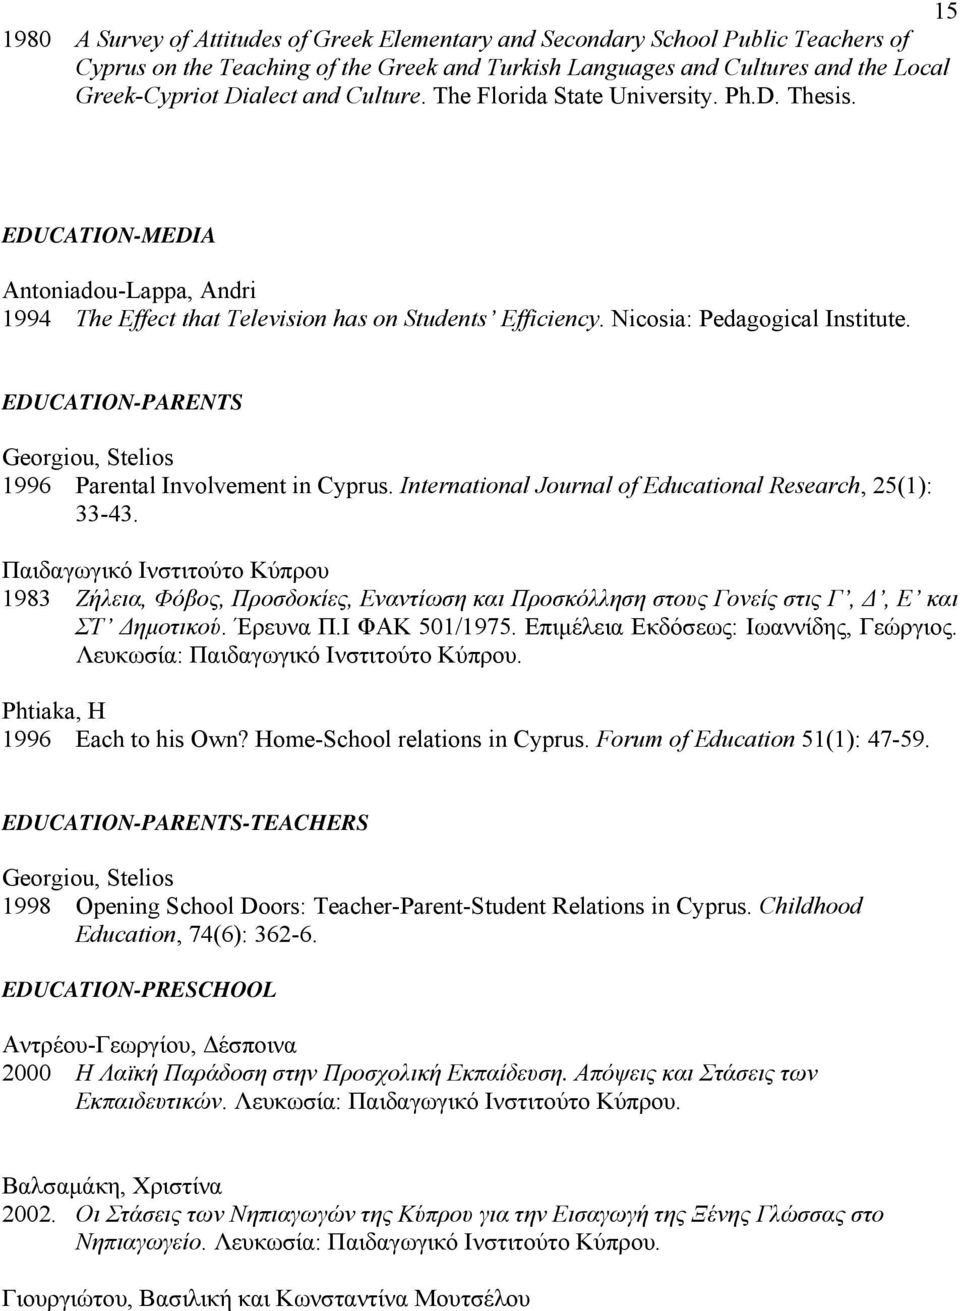 EDUCATION-PARENTS Georgiou, Stelios 1996 Parental Involvement in Cyprus. International Journal of Educational Research, 25(1): 33-43.